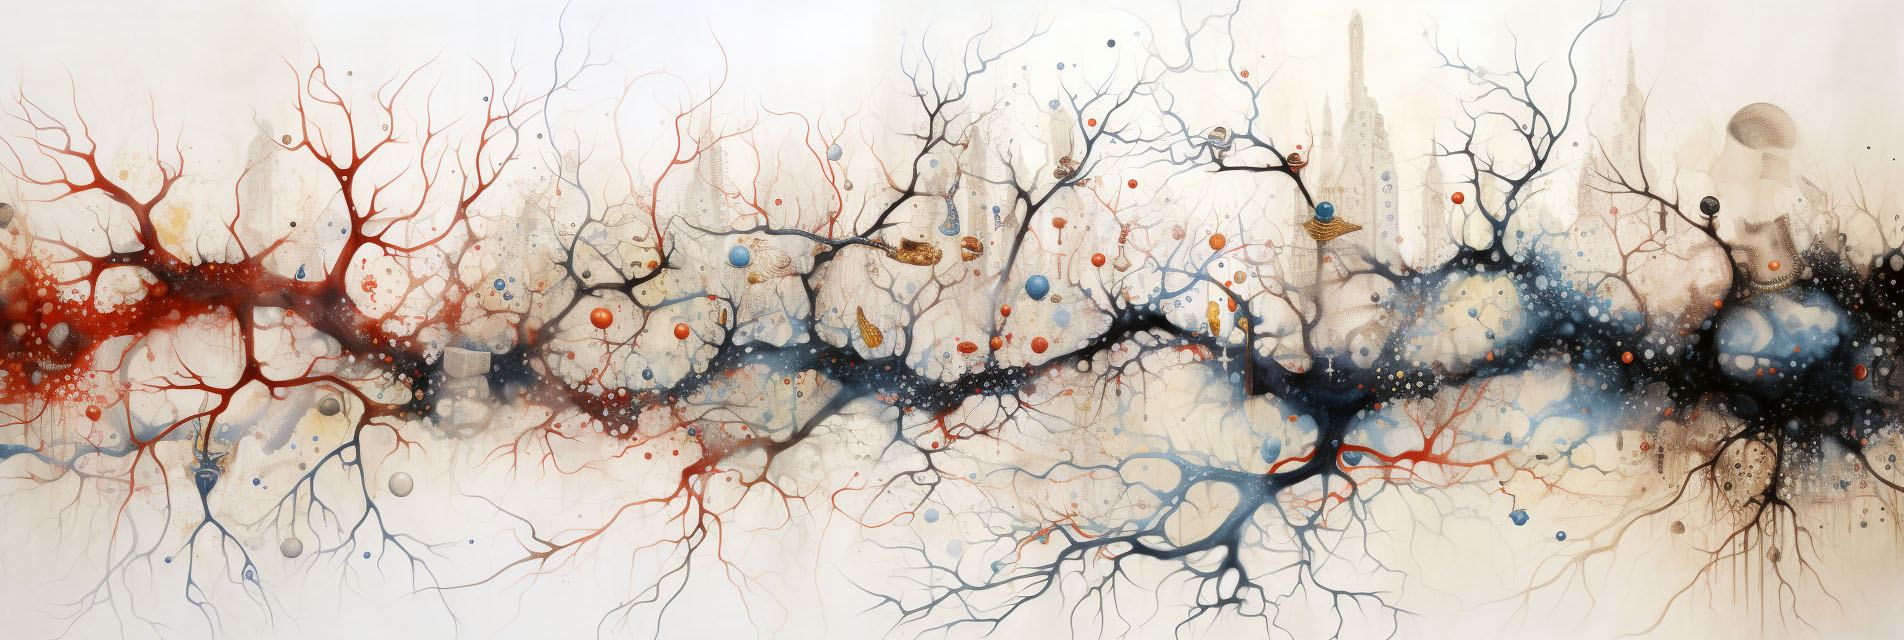 McCulloch-Pitts neuron